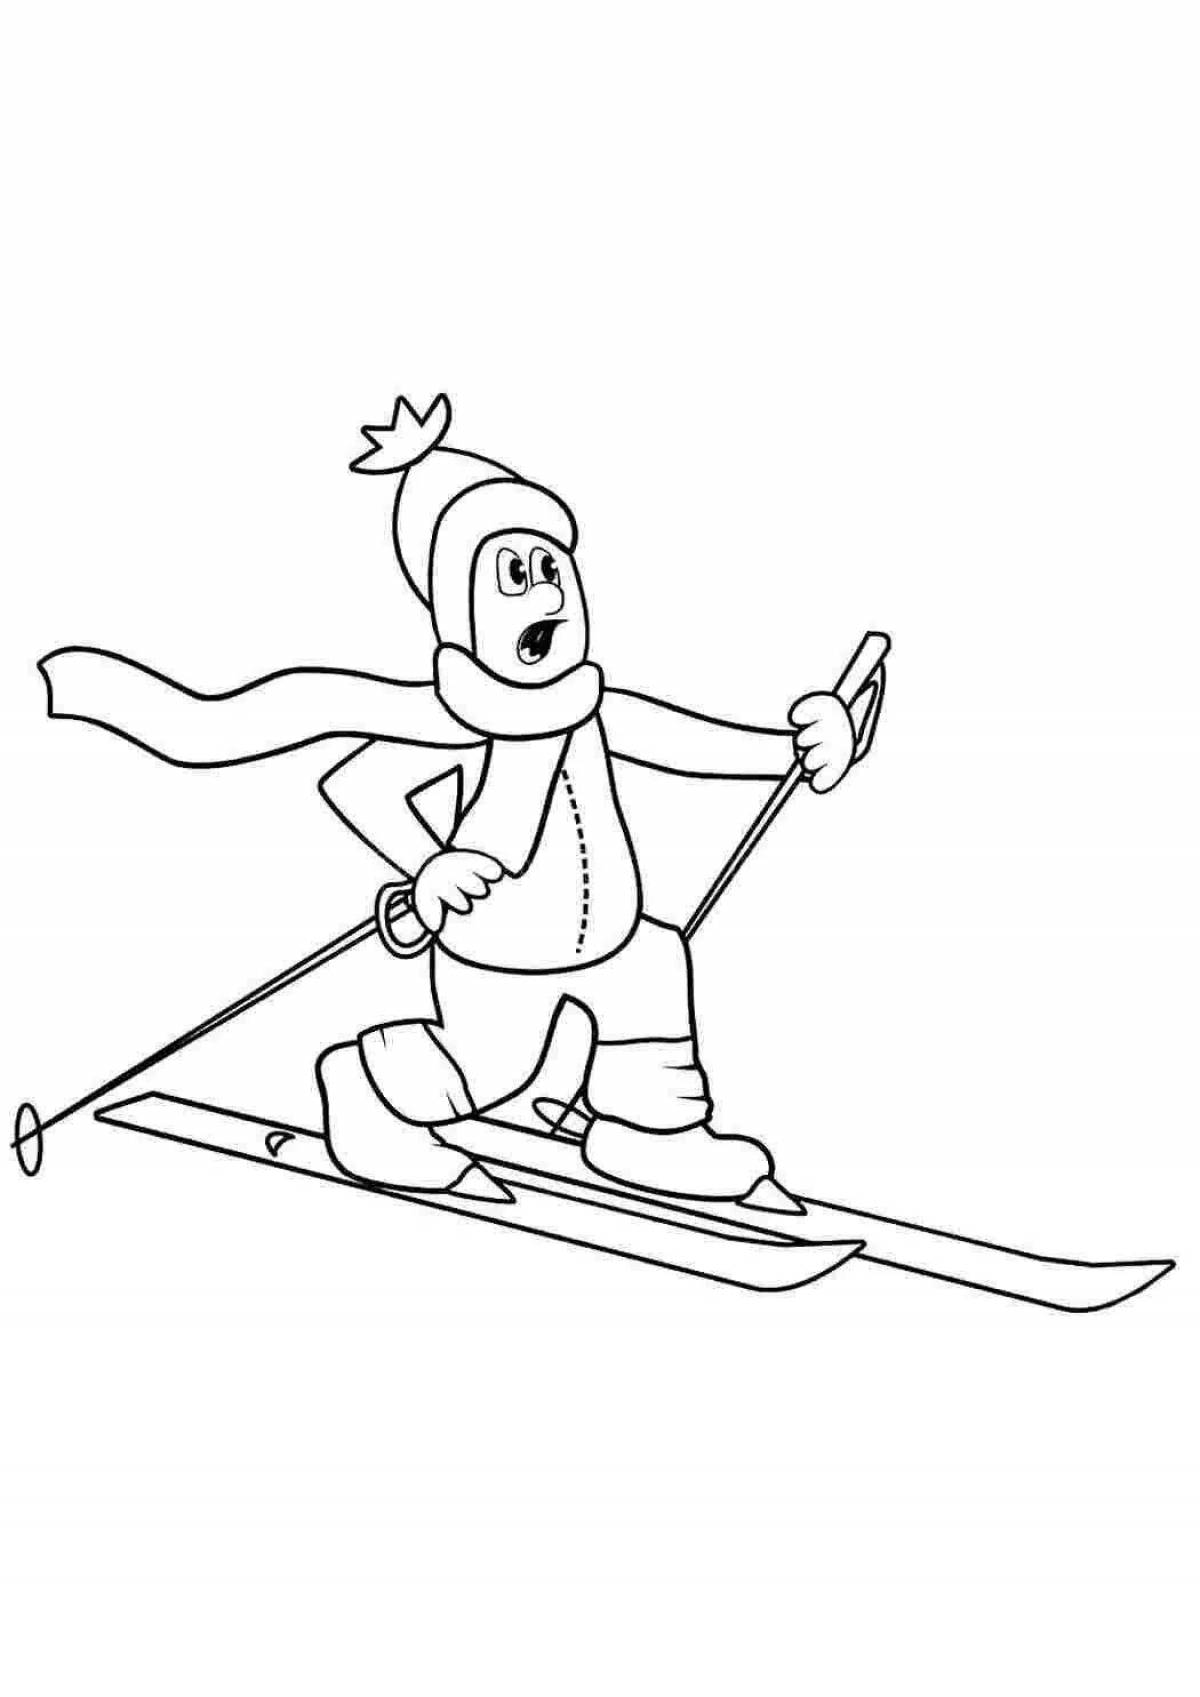 Coloring book of a fascinating boy on skis